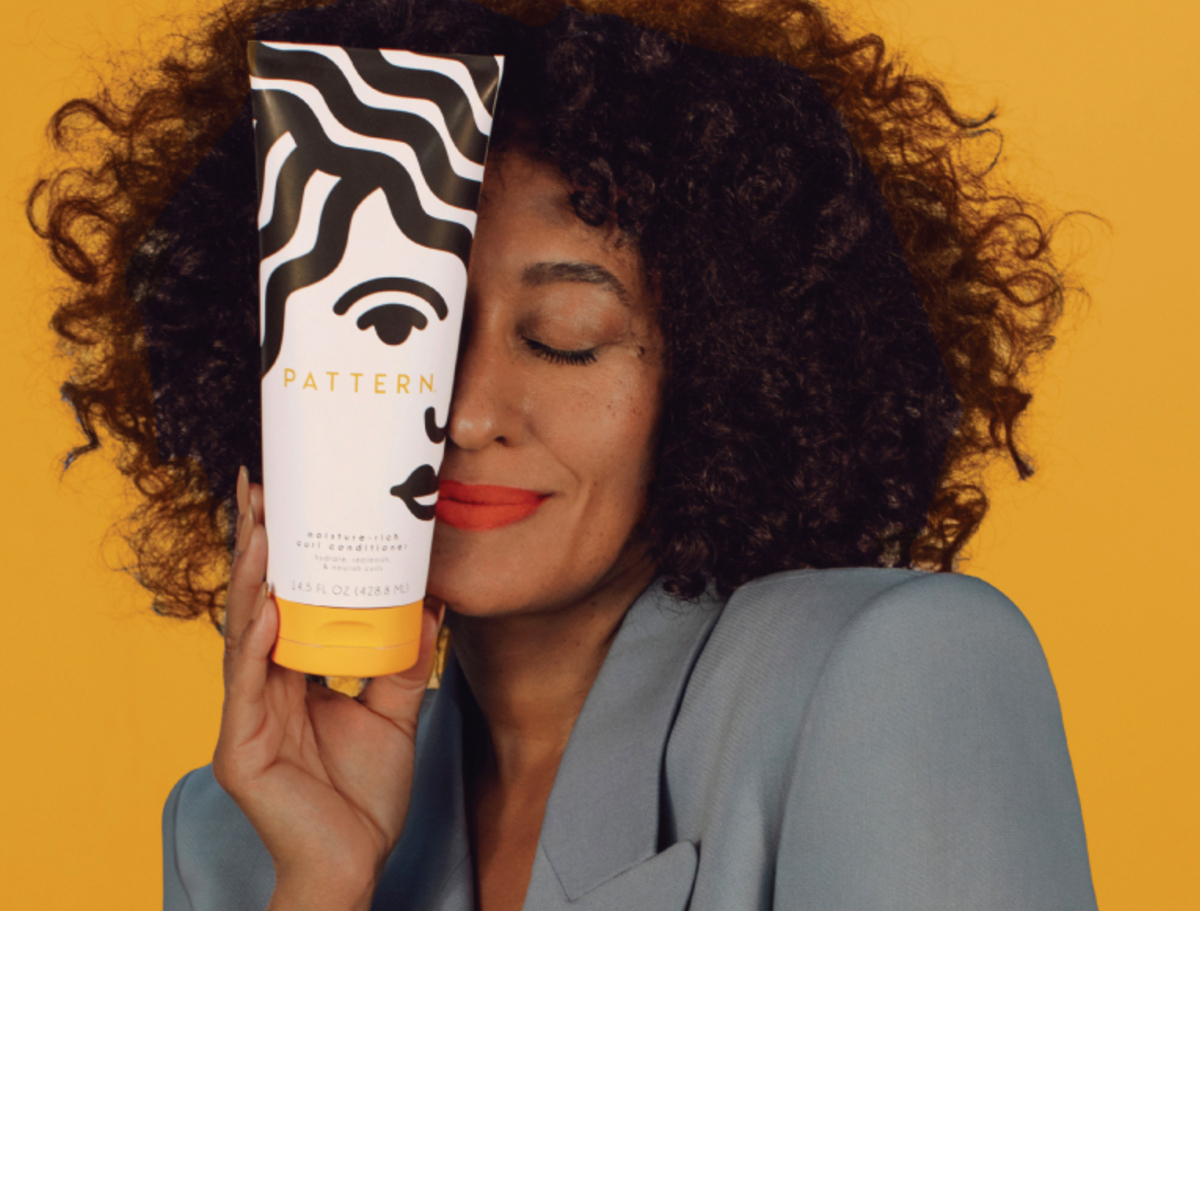 Why Curly Girls Everywhere Love Tracee Ellis Ross’ Pattern Haircare